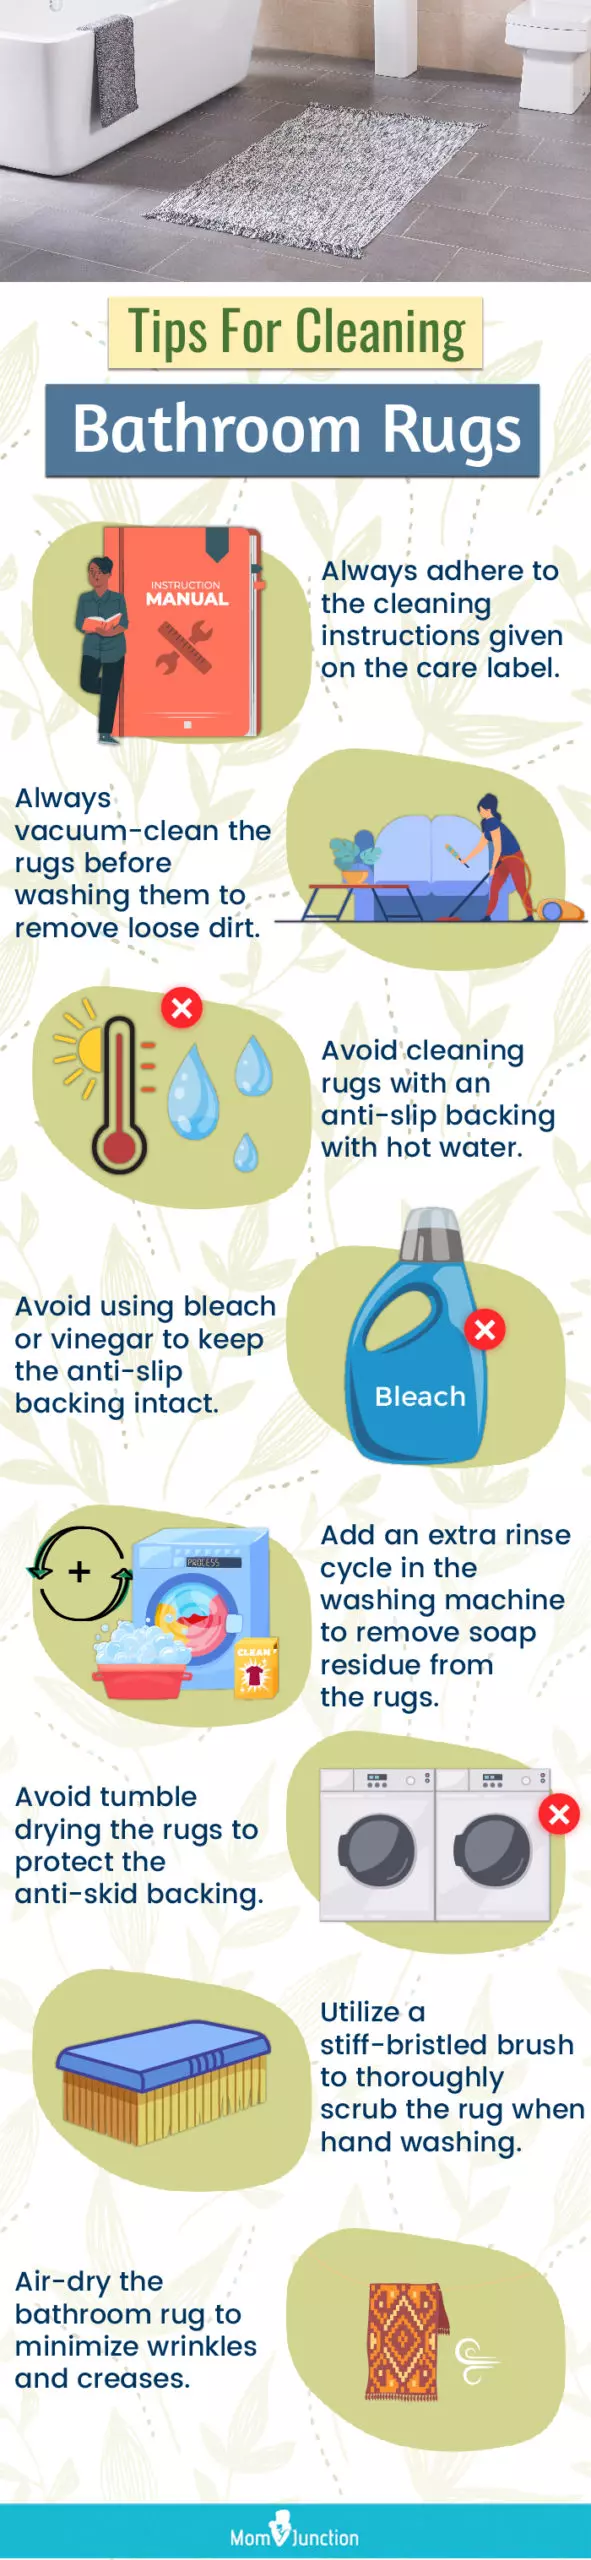 Tips For Cleaning Bathroom Rugs (infographic)